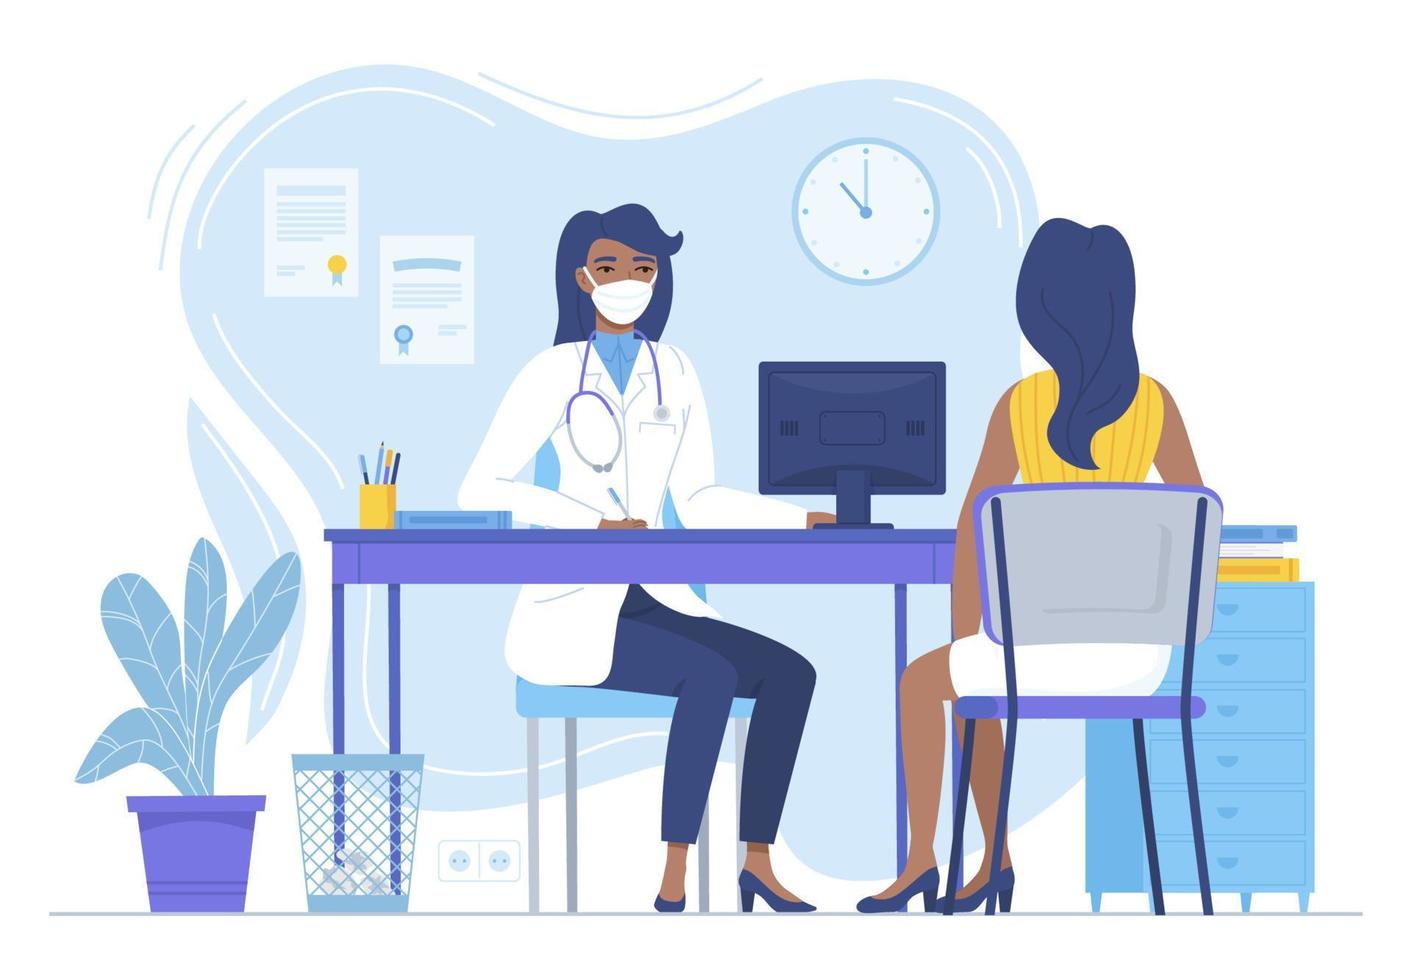 Black woman Doctor in face mask conculting patient black girl. Medcine, pandemic, lockdown therapy, health care, hospital workspace concept. Stock vector illustration in flat style isolated on white.